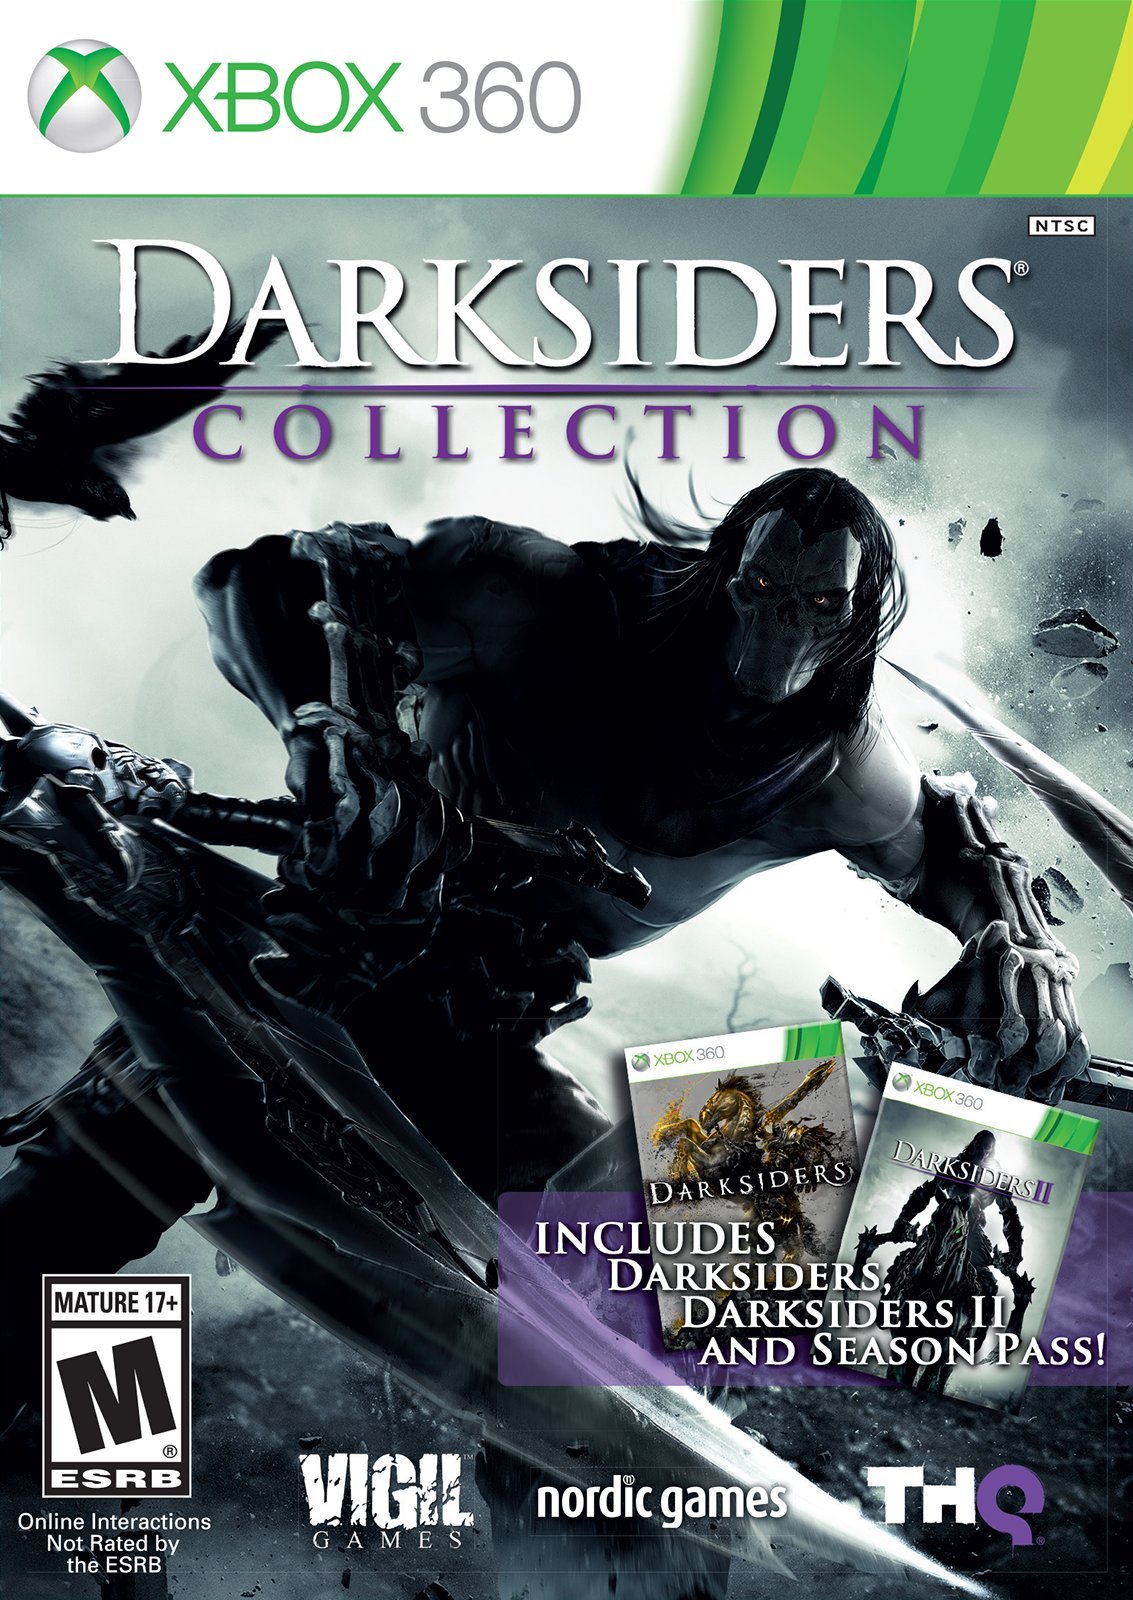 Darksiders Collection Release Date (PS3, Xbox 360, PC)